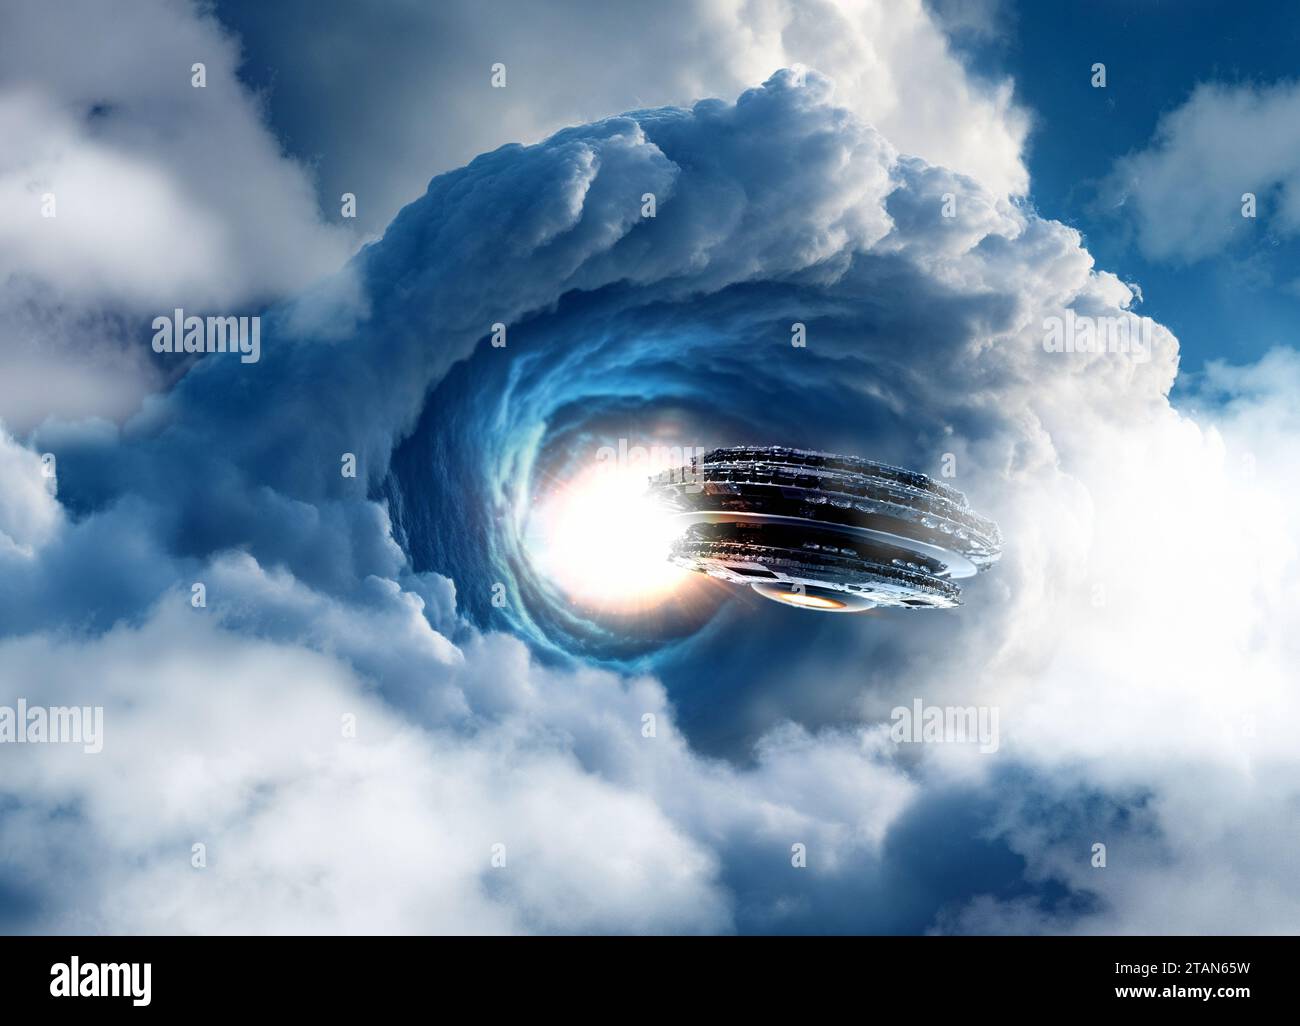 UFO appearing from wormhole, illustration Stock Photo